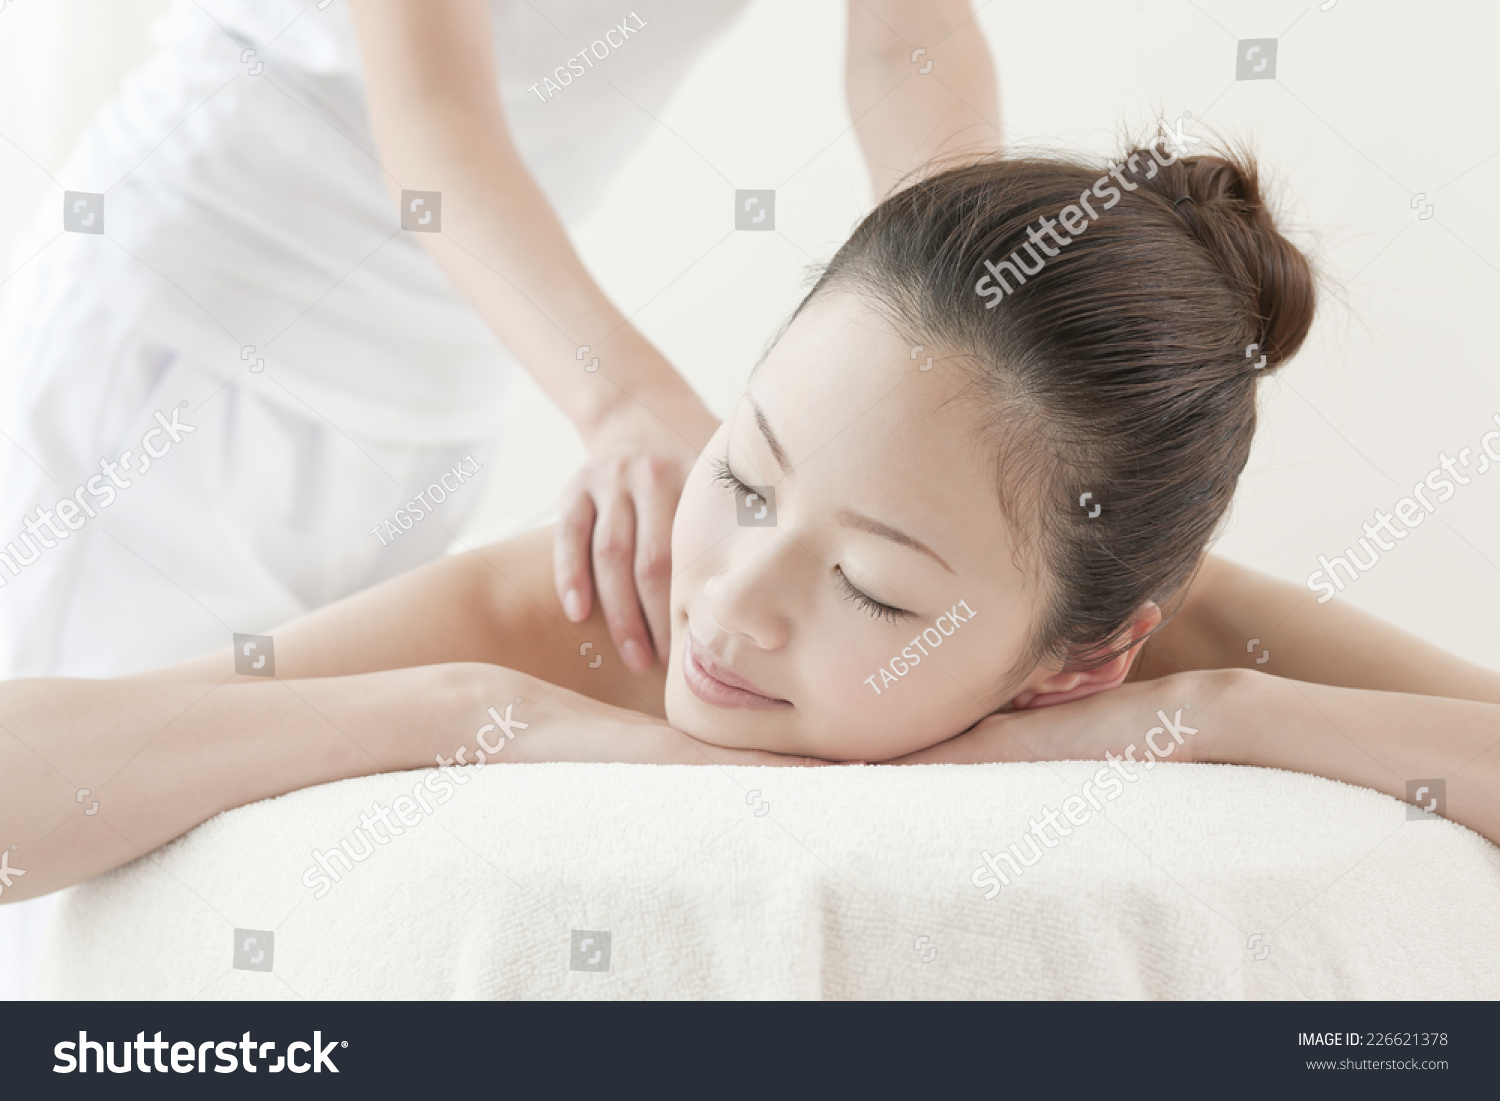 Japanese Woman Receiving Oil Massage pic